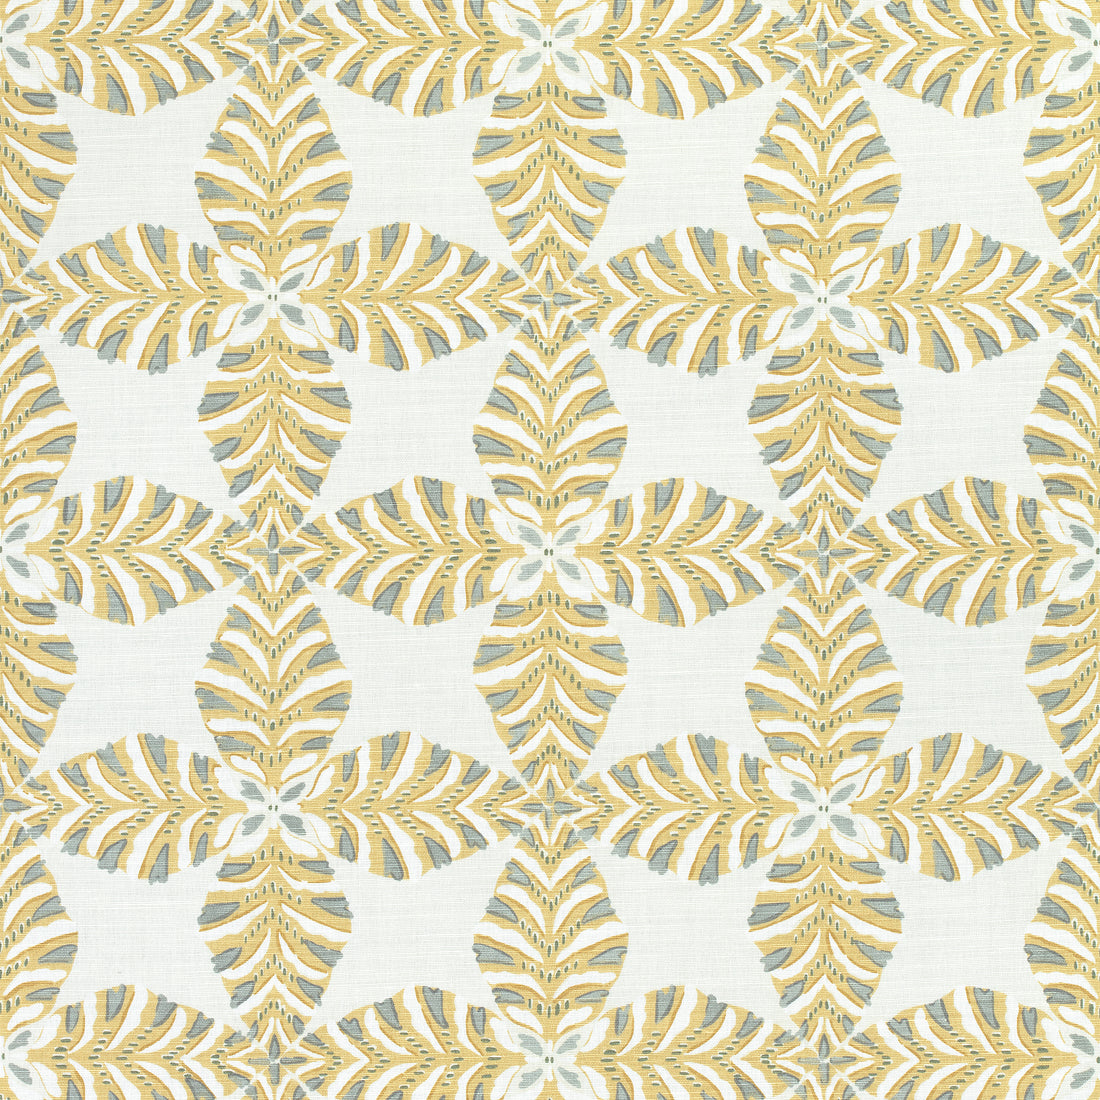 Starleaf fabric in yellow color - pattern number F92970 - by Thibaut in the Paramount collection